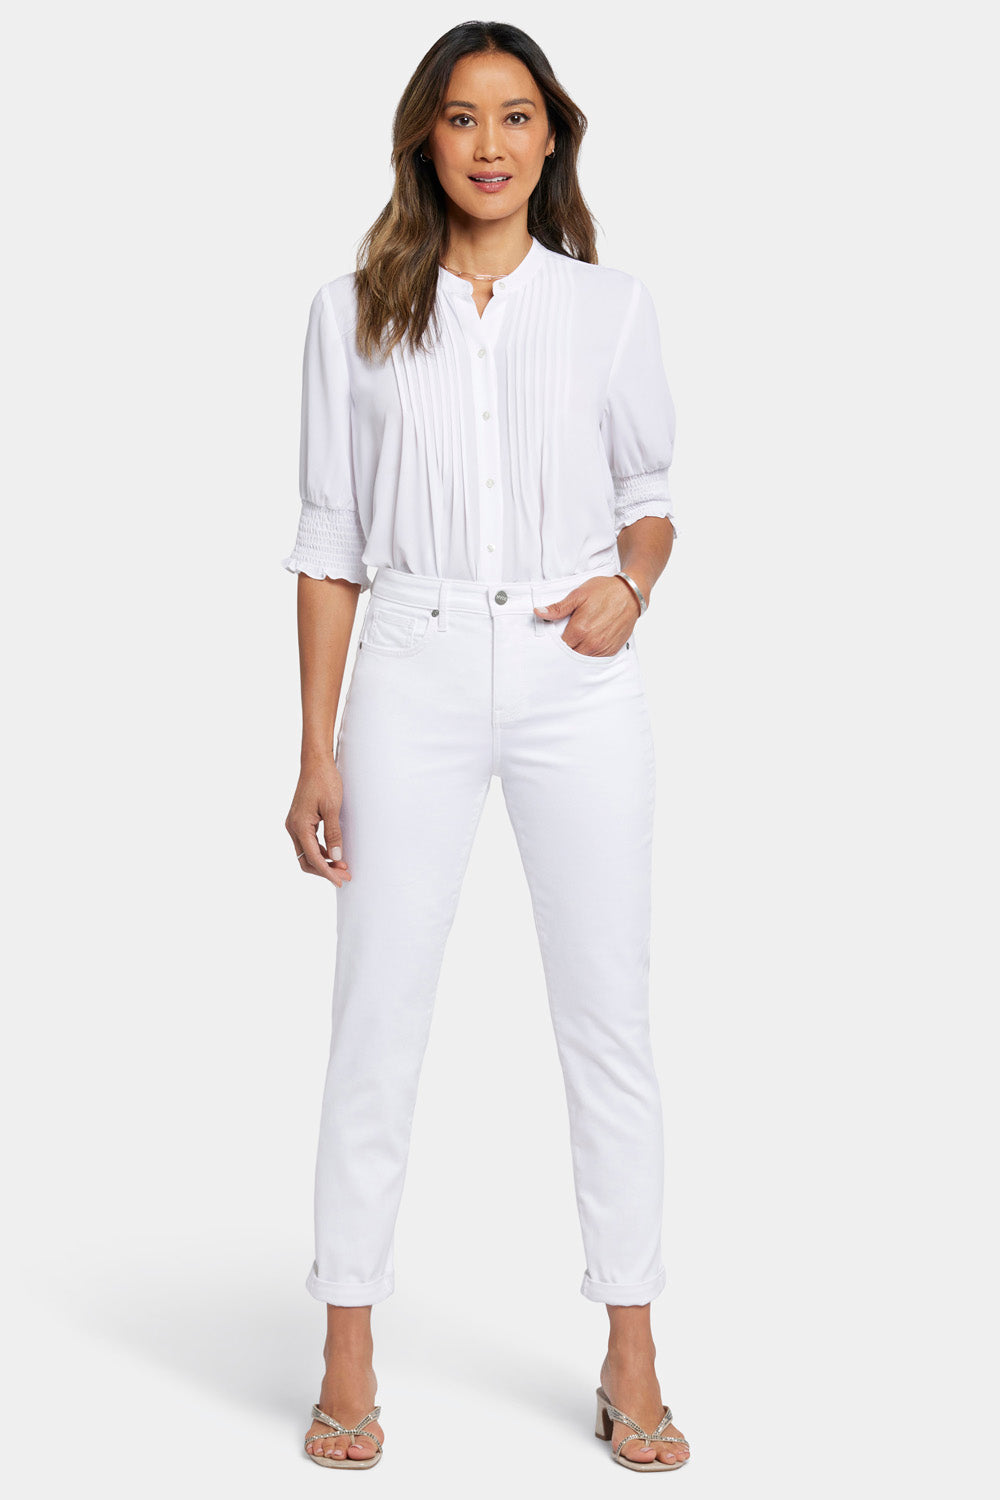 Buy W White Cotton Embroidered Pants for Women Online @ Tata CLiQ